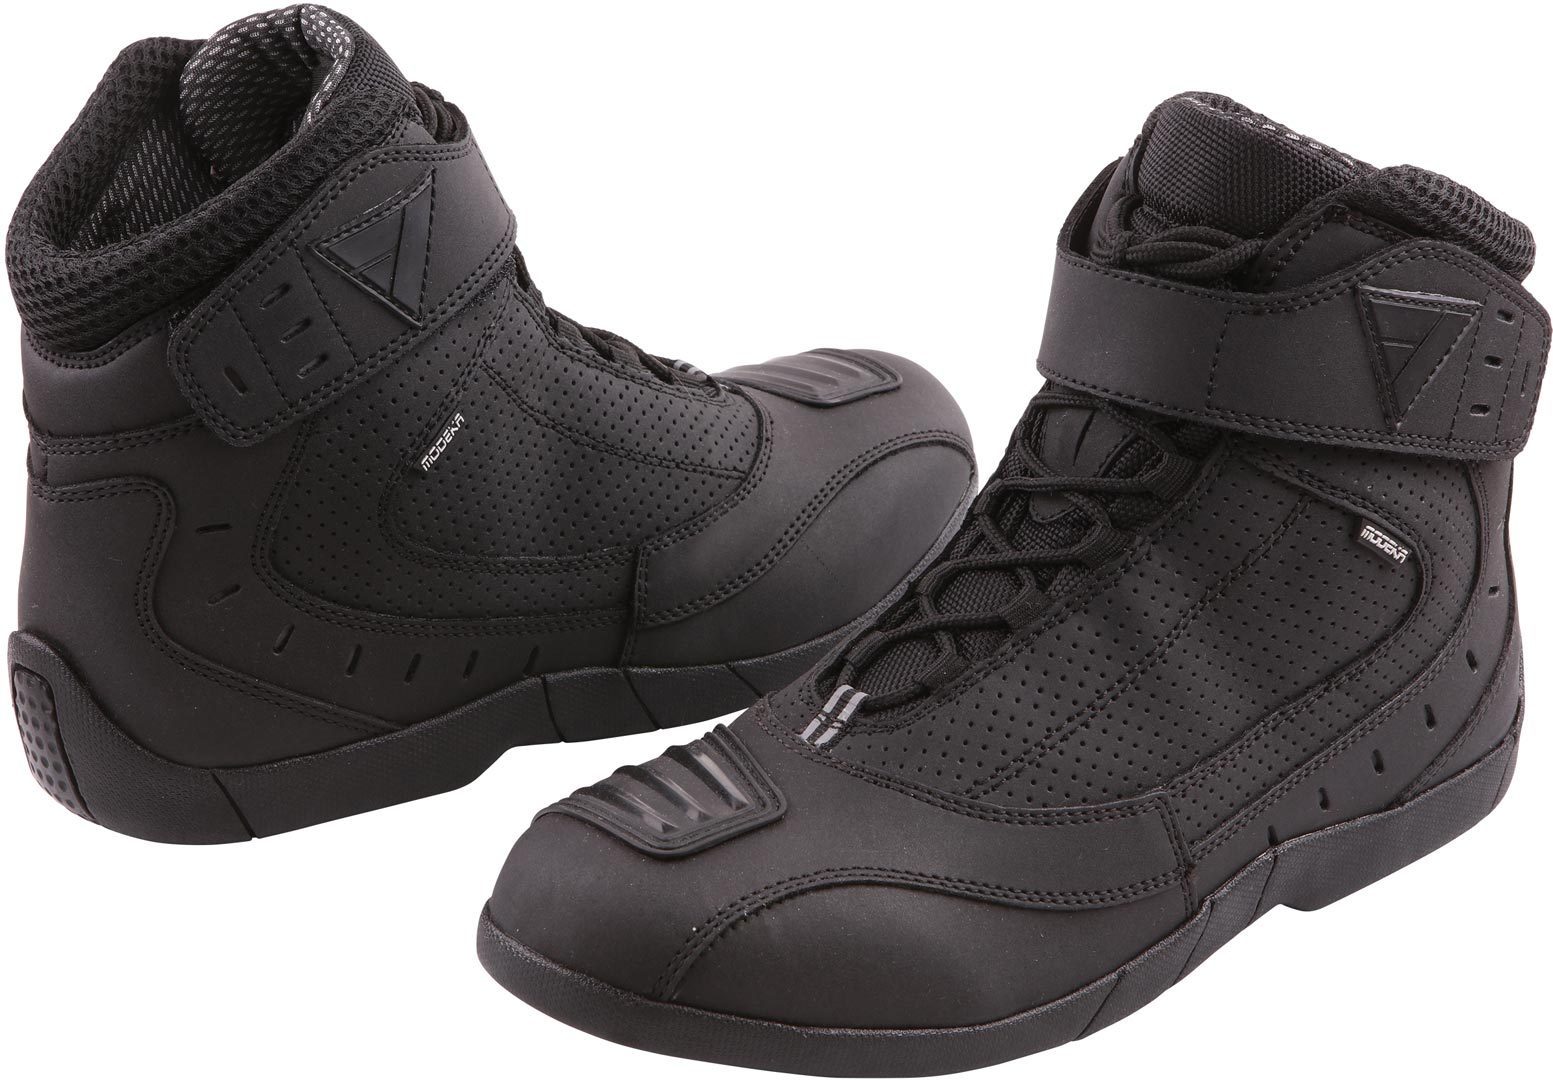 Buy > black boots motorcycle > in stock